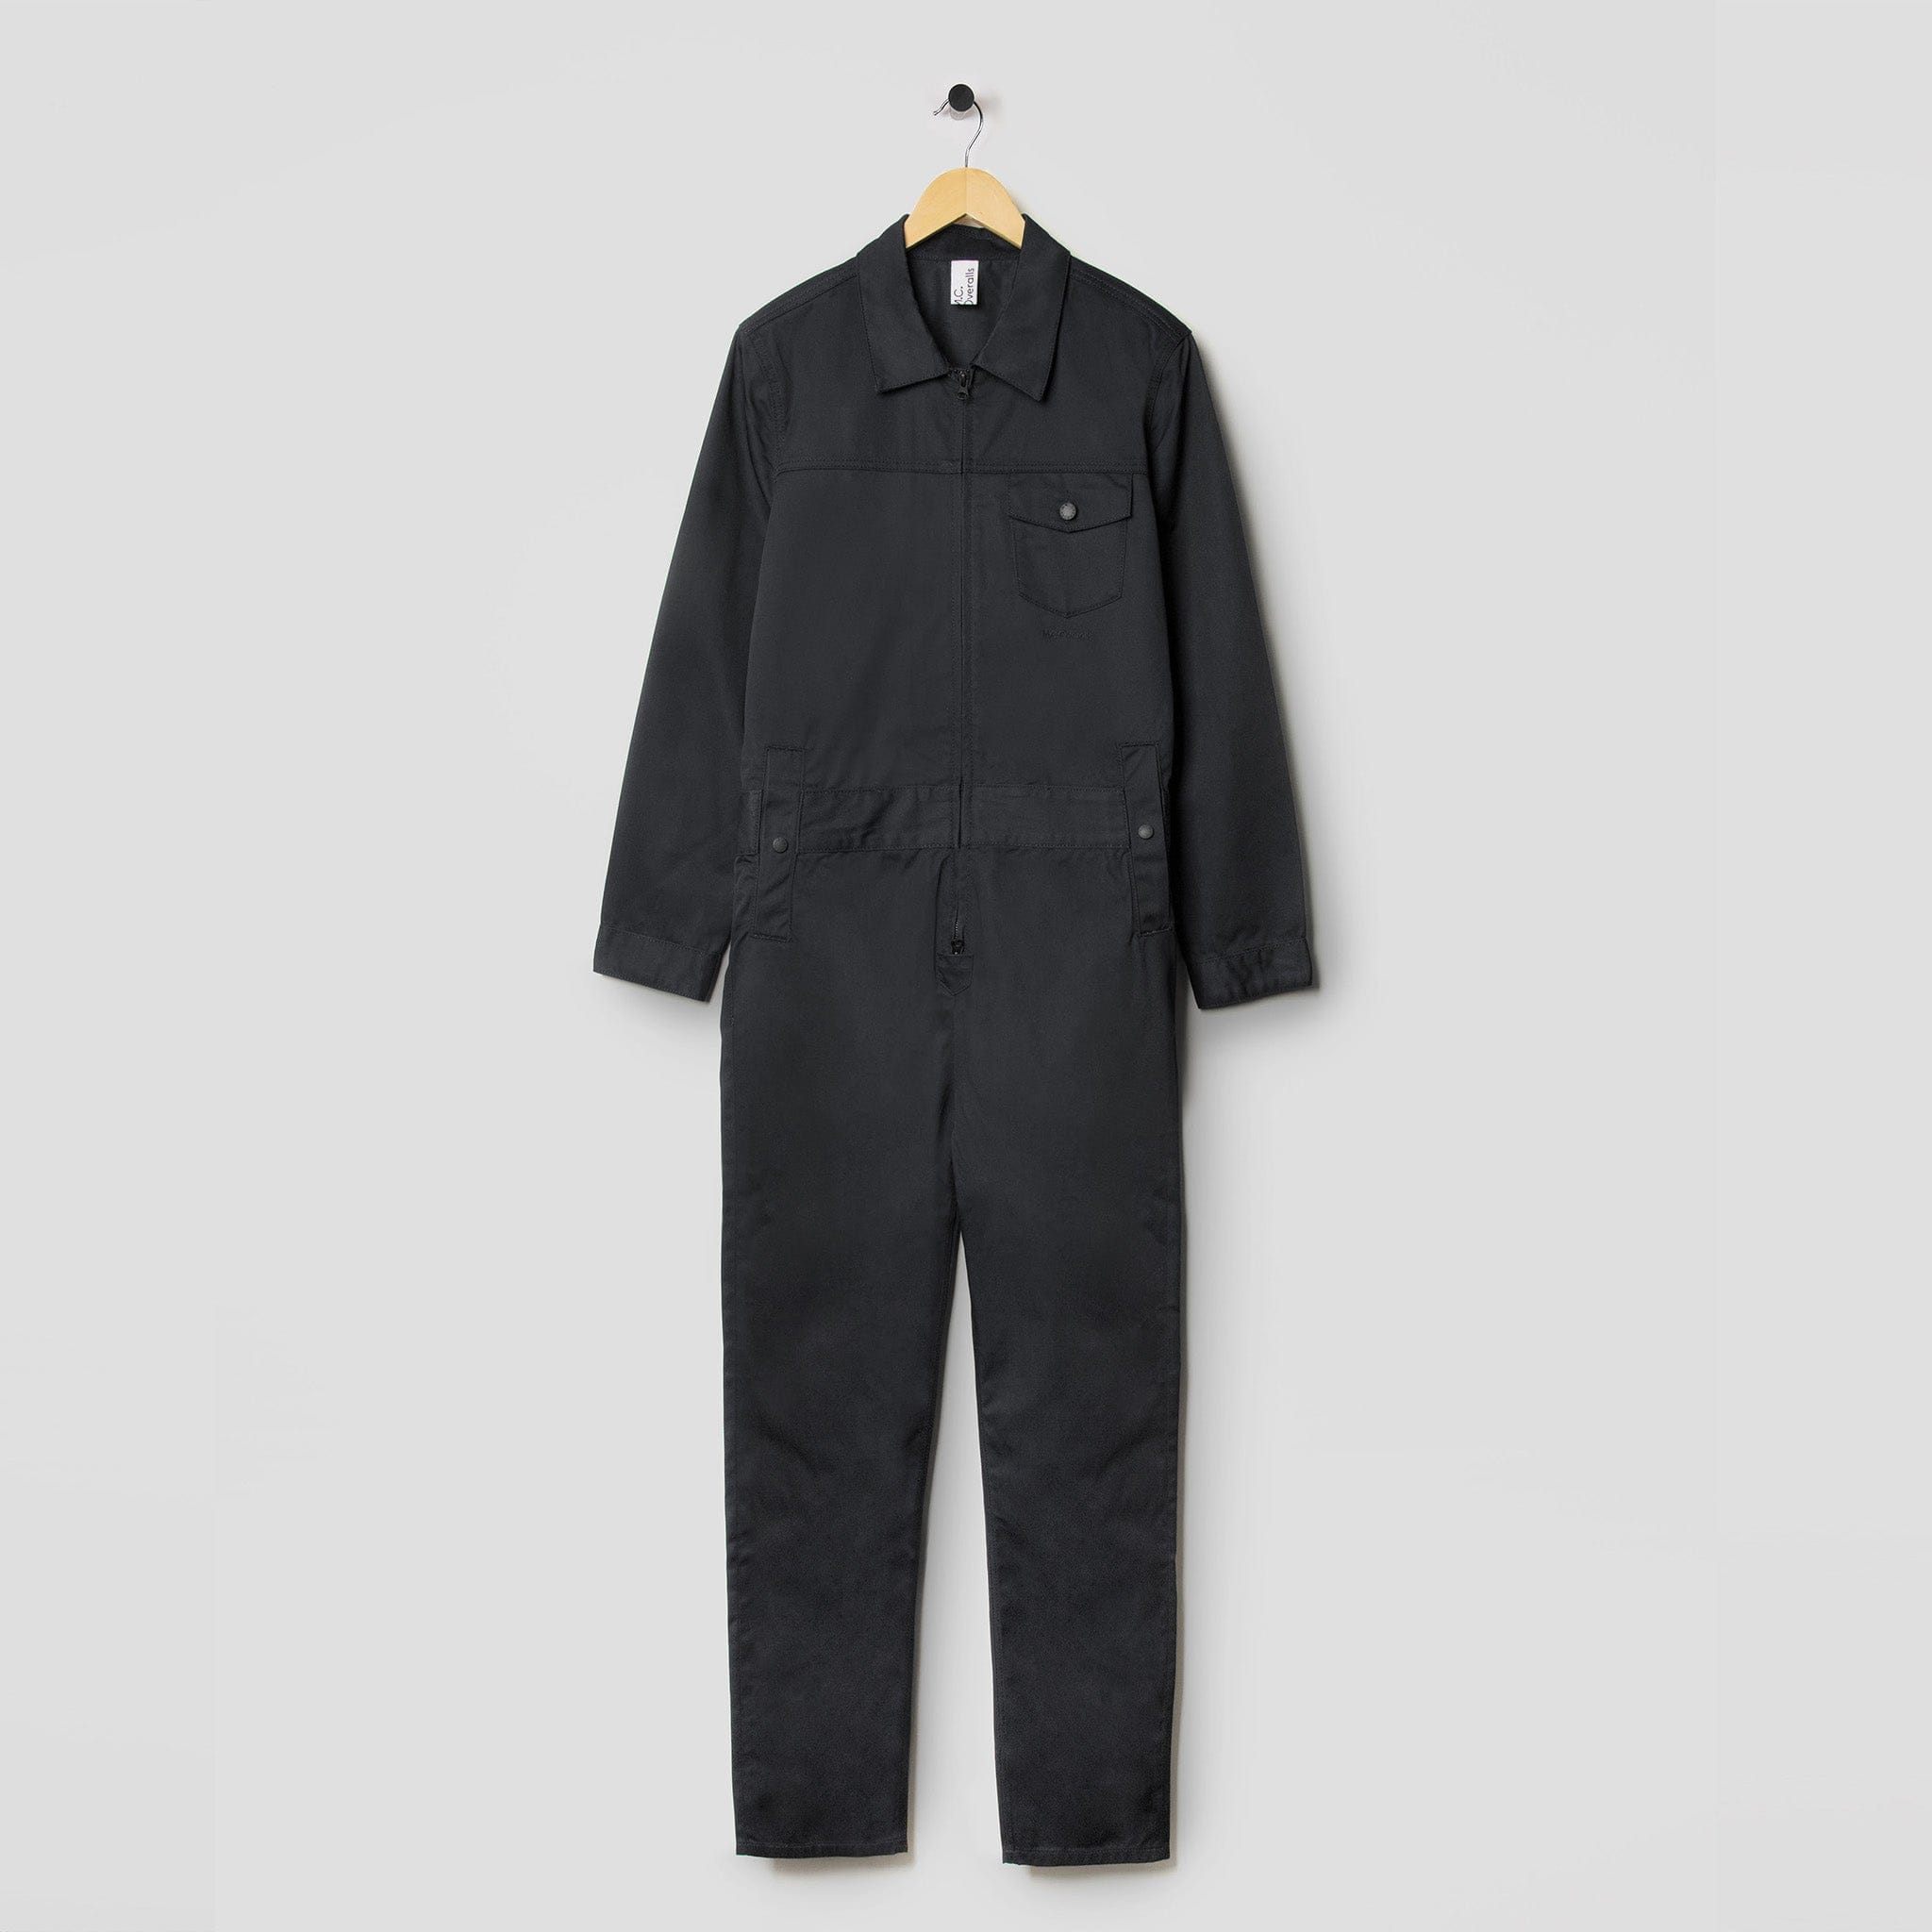 Collared Zip Overall Black